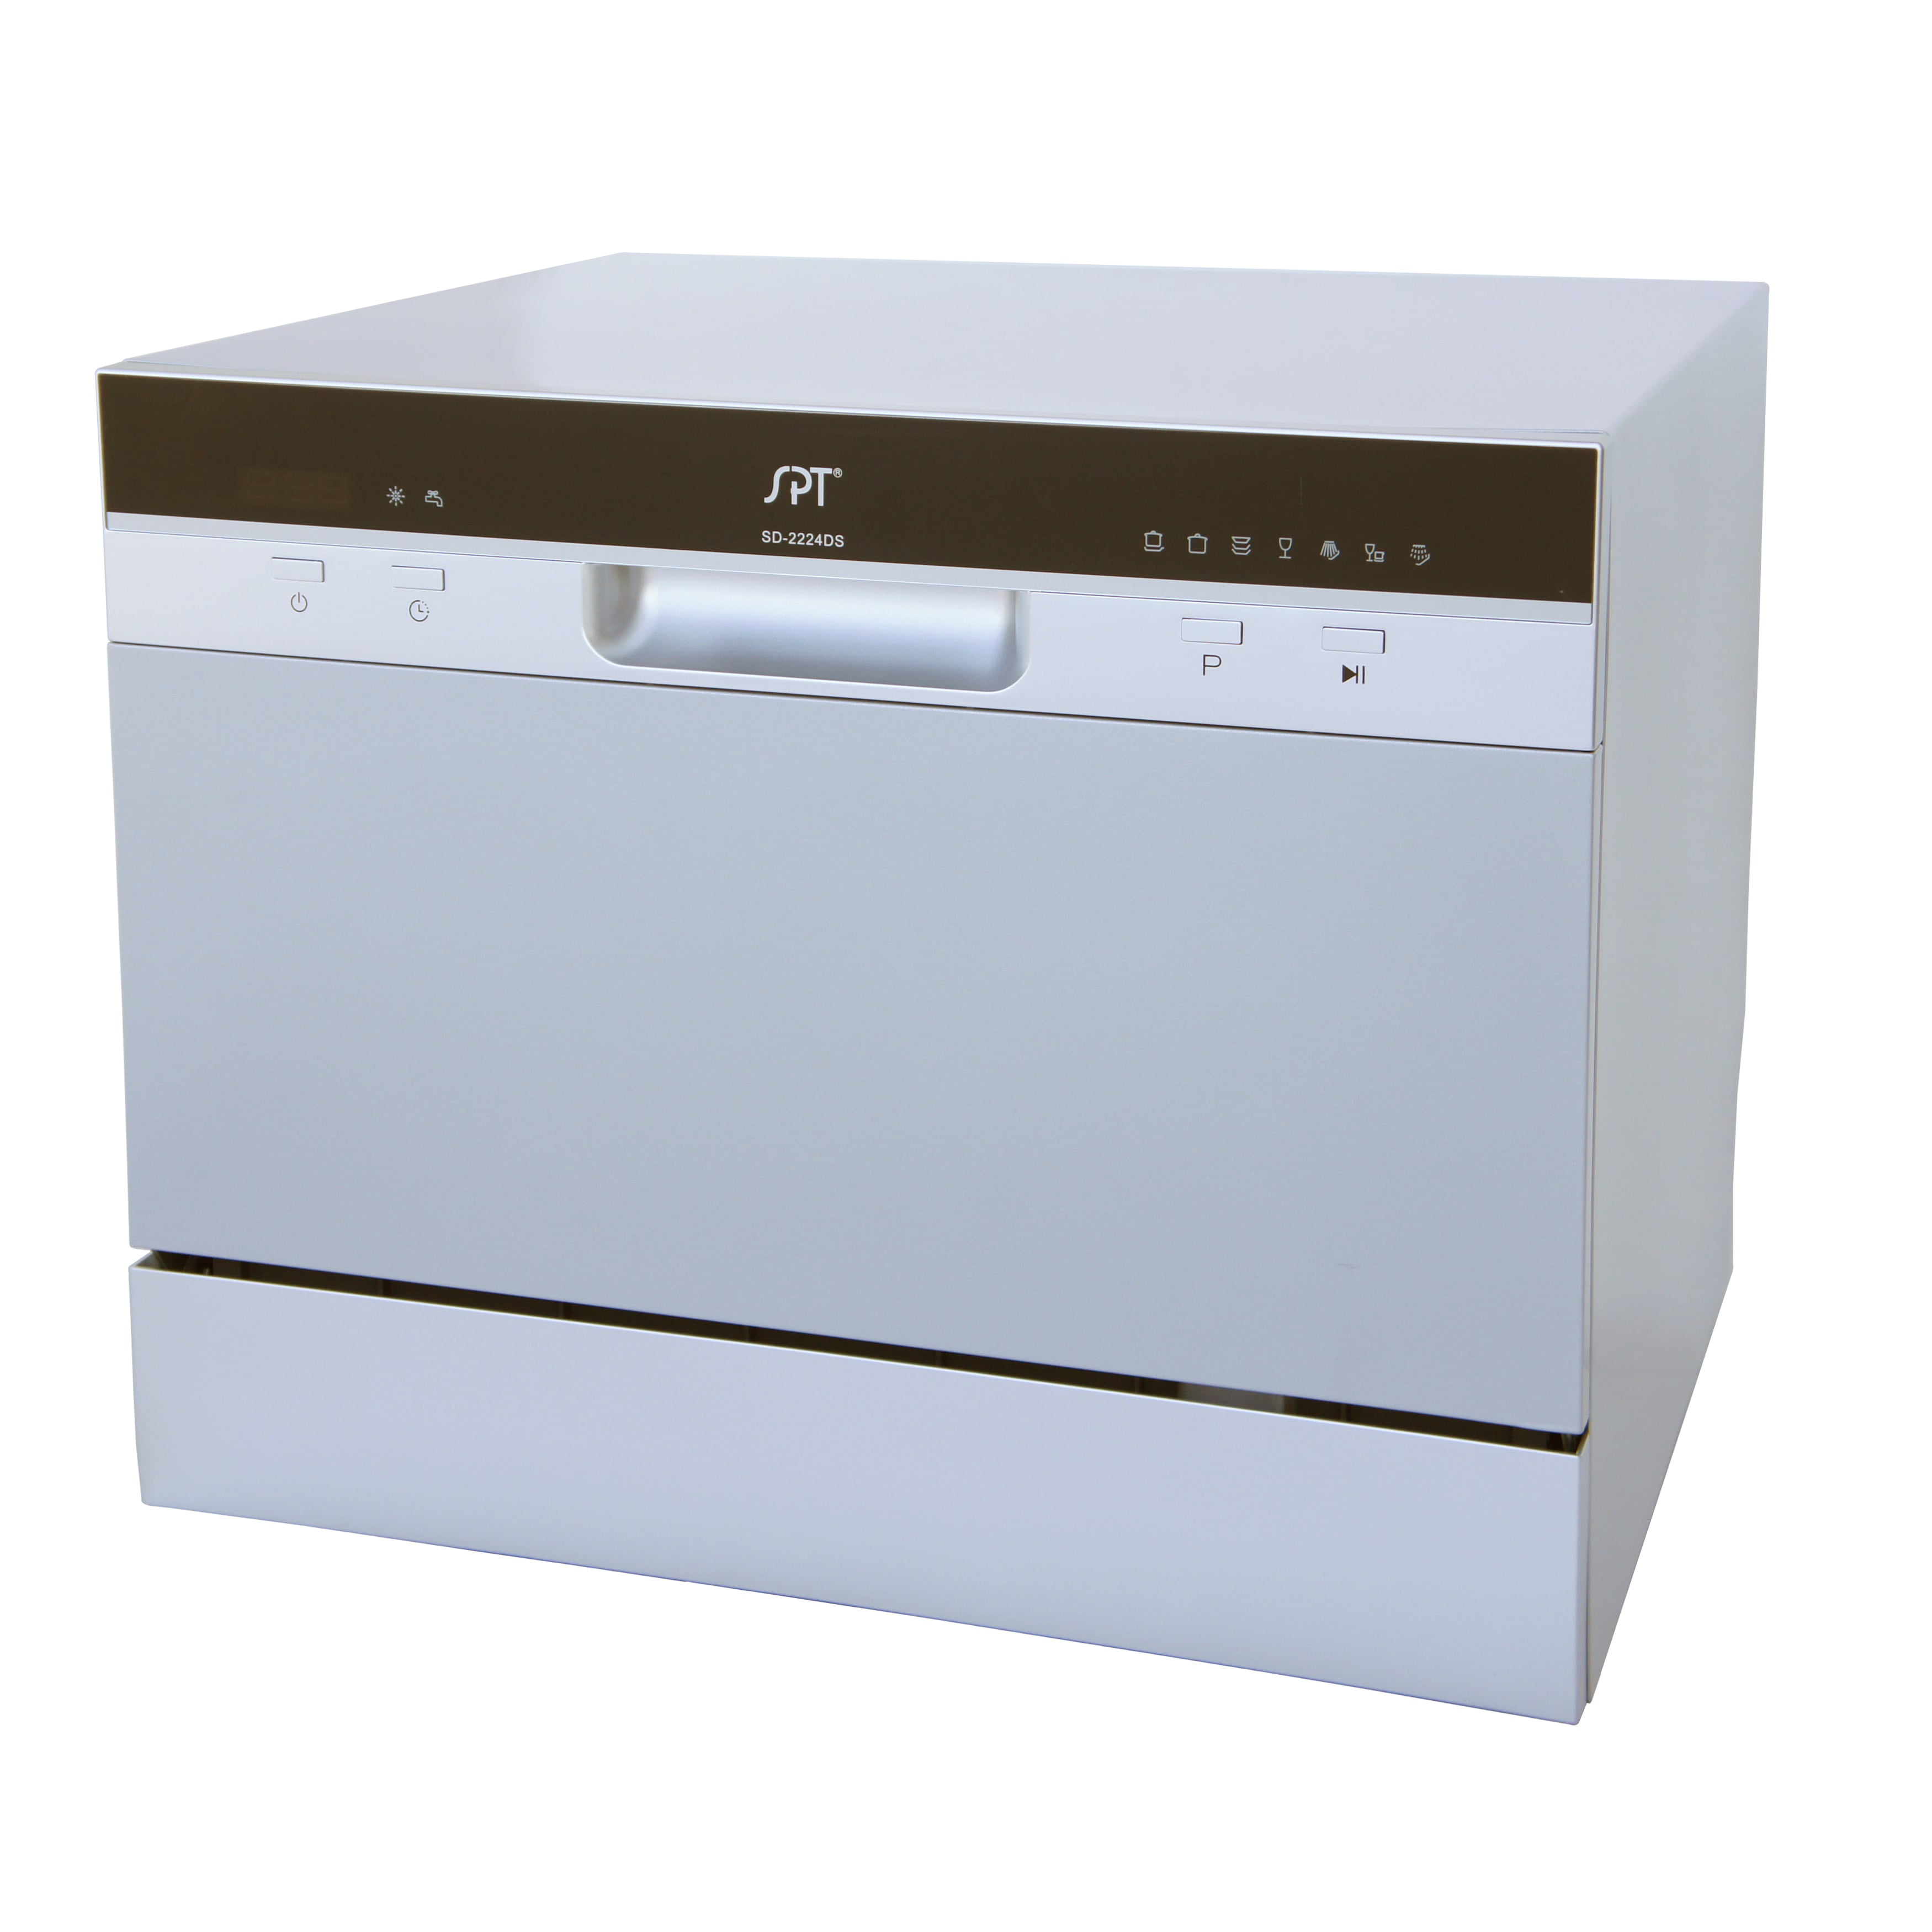 SD-2224DS Countertop Dishwasher with Delay Start & LED – Silver - 2